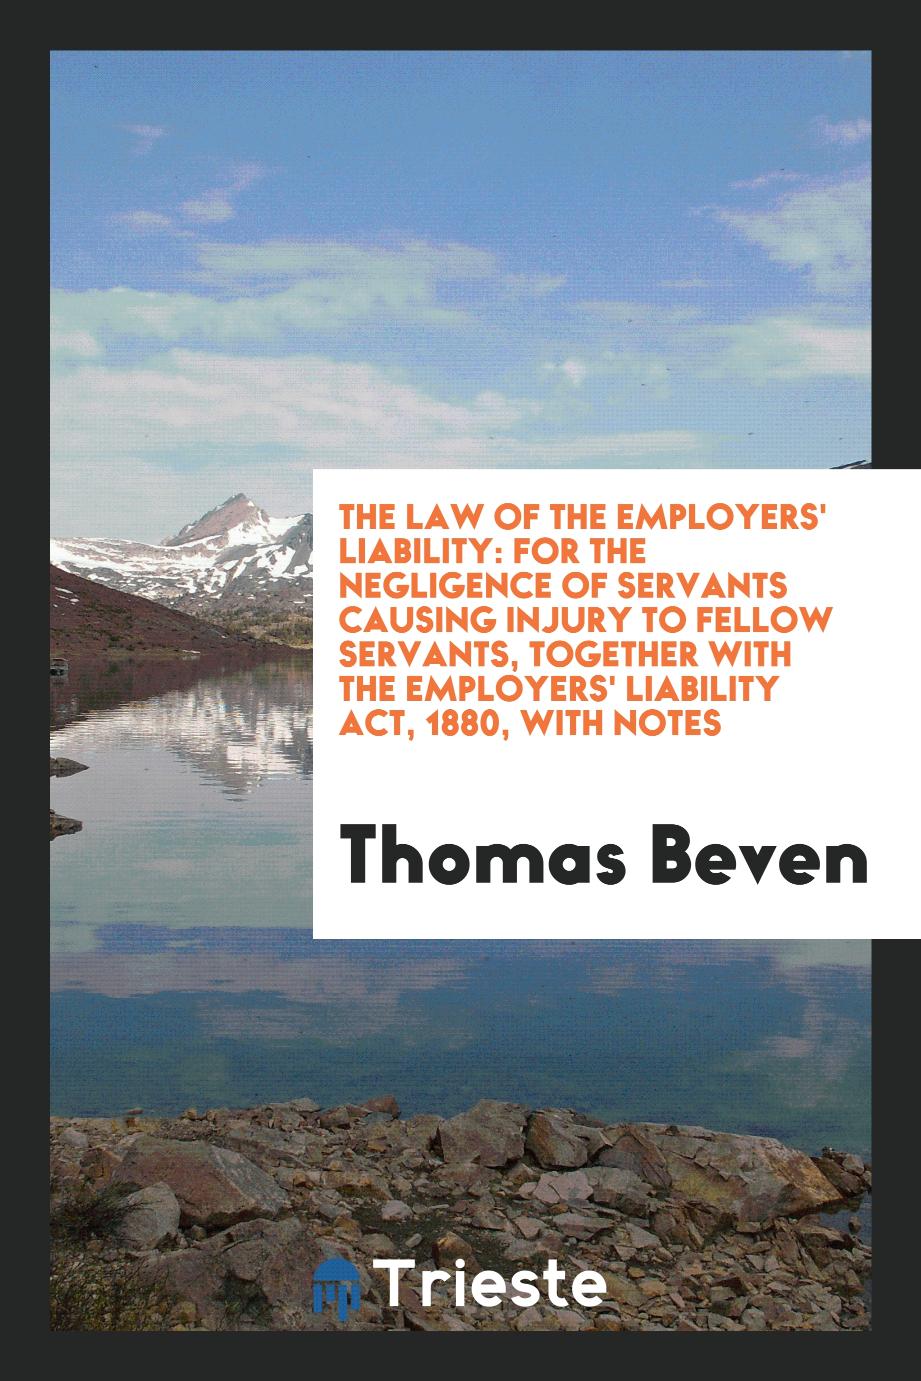 The Law of the Employers' Liability: For the Negligence of Servants Causing Injury to Fellow Servants, Together with the Employers' Liability Act, 1880, with Notes